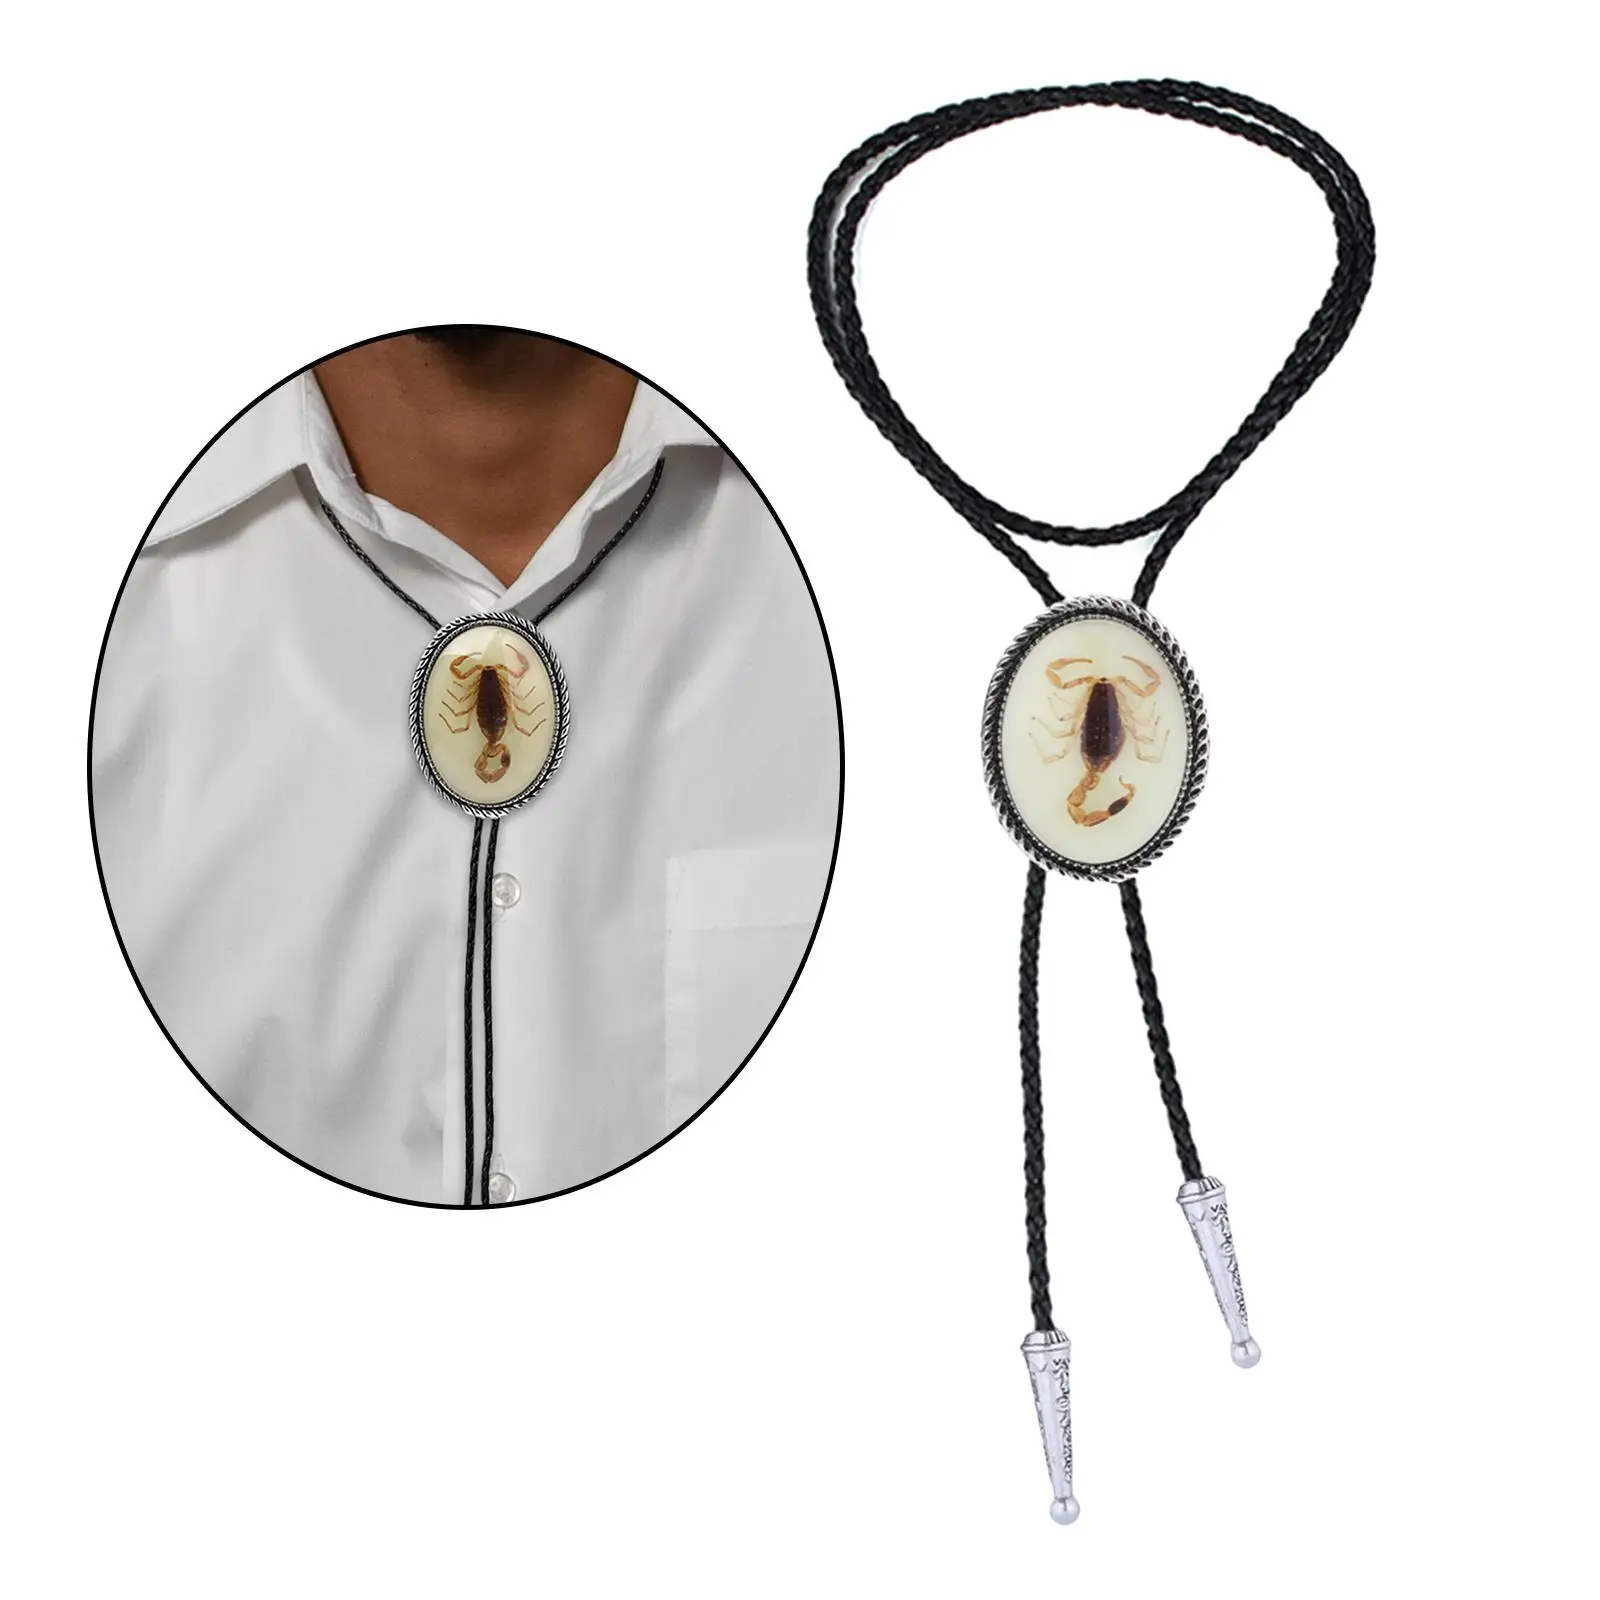 Alloy Mens Bolo Tie Necktie Neck Rope Shirt Chain Western Necklace Accessories PU Leather Adjustable for Women Jazz Hat Cowboy